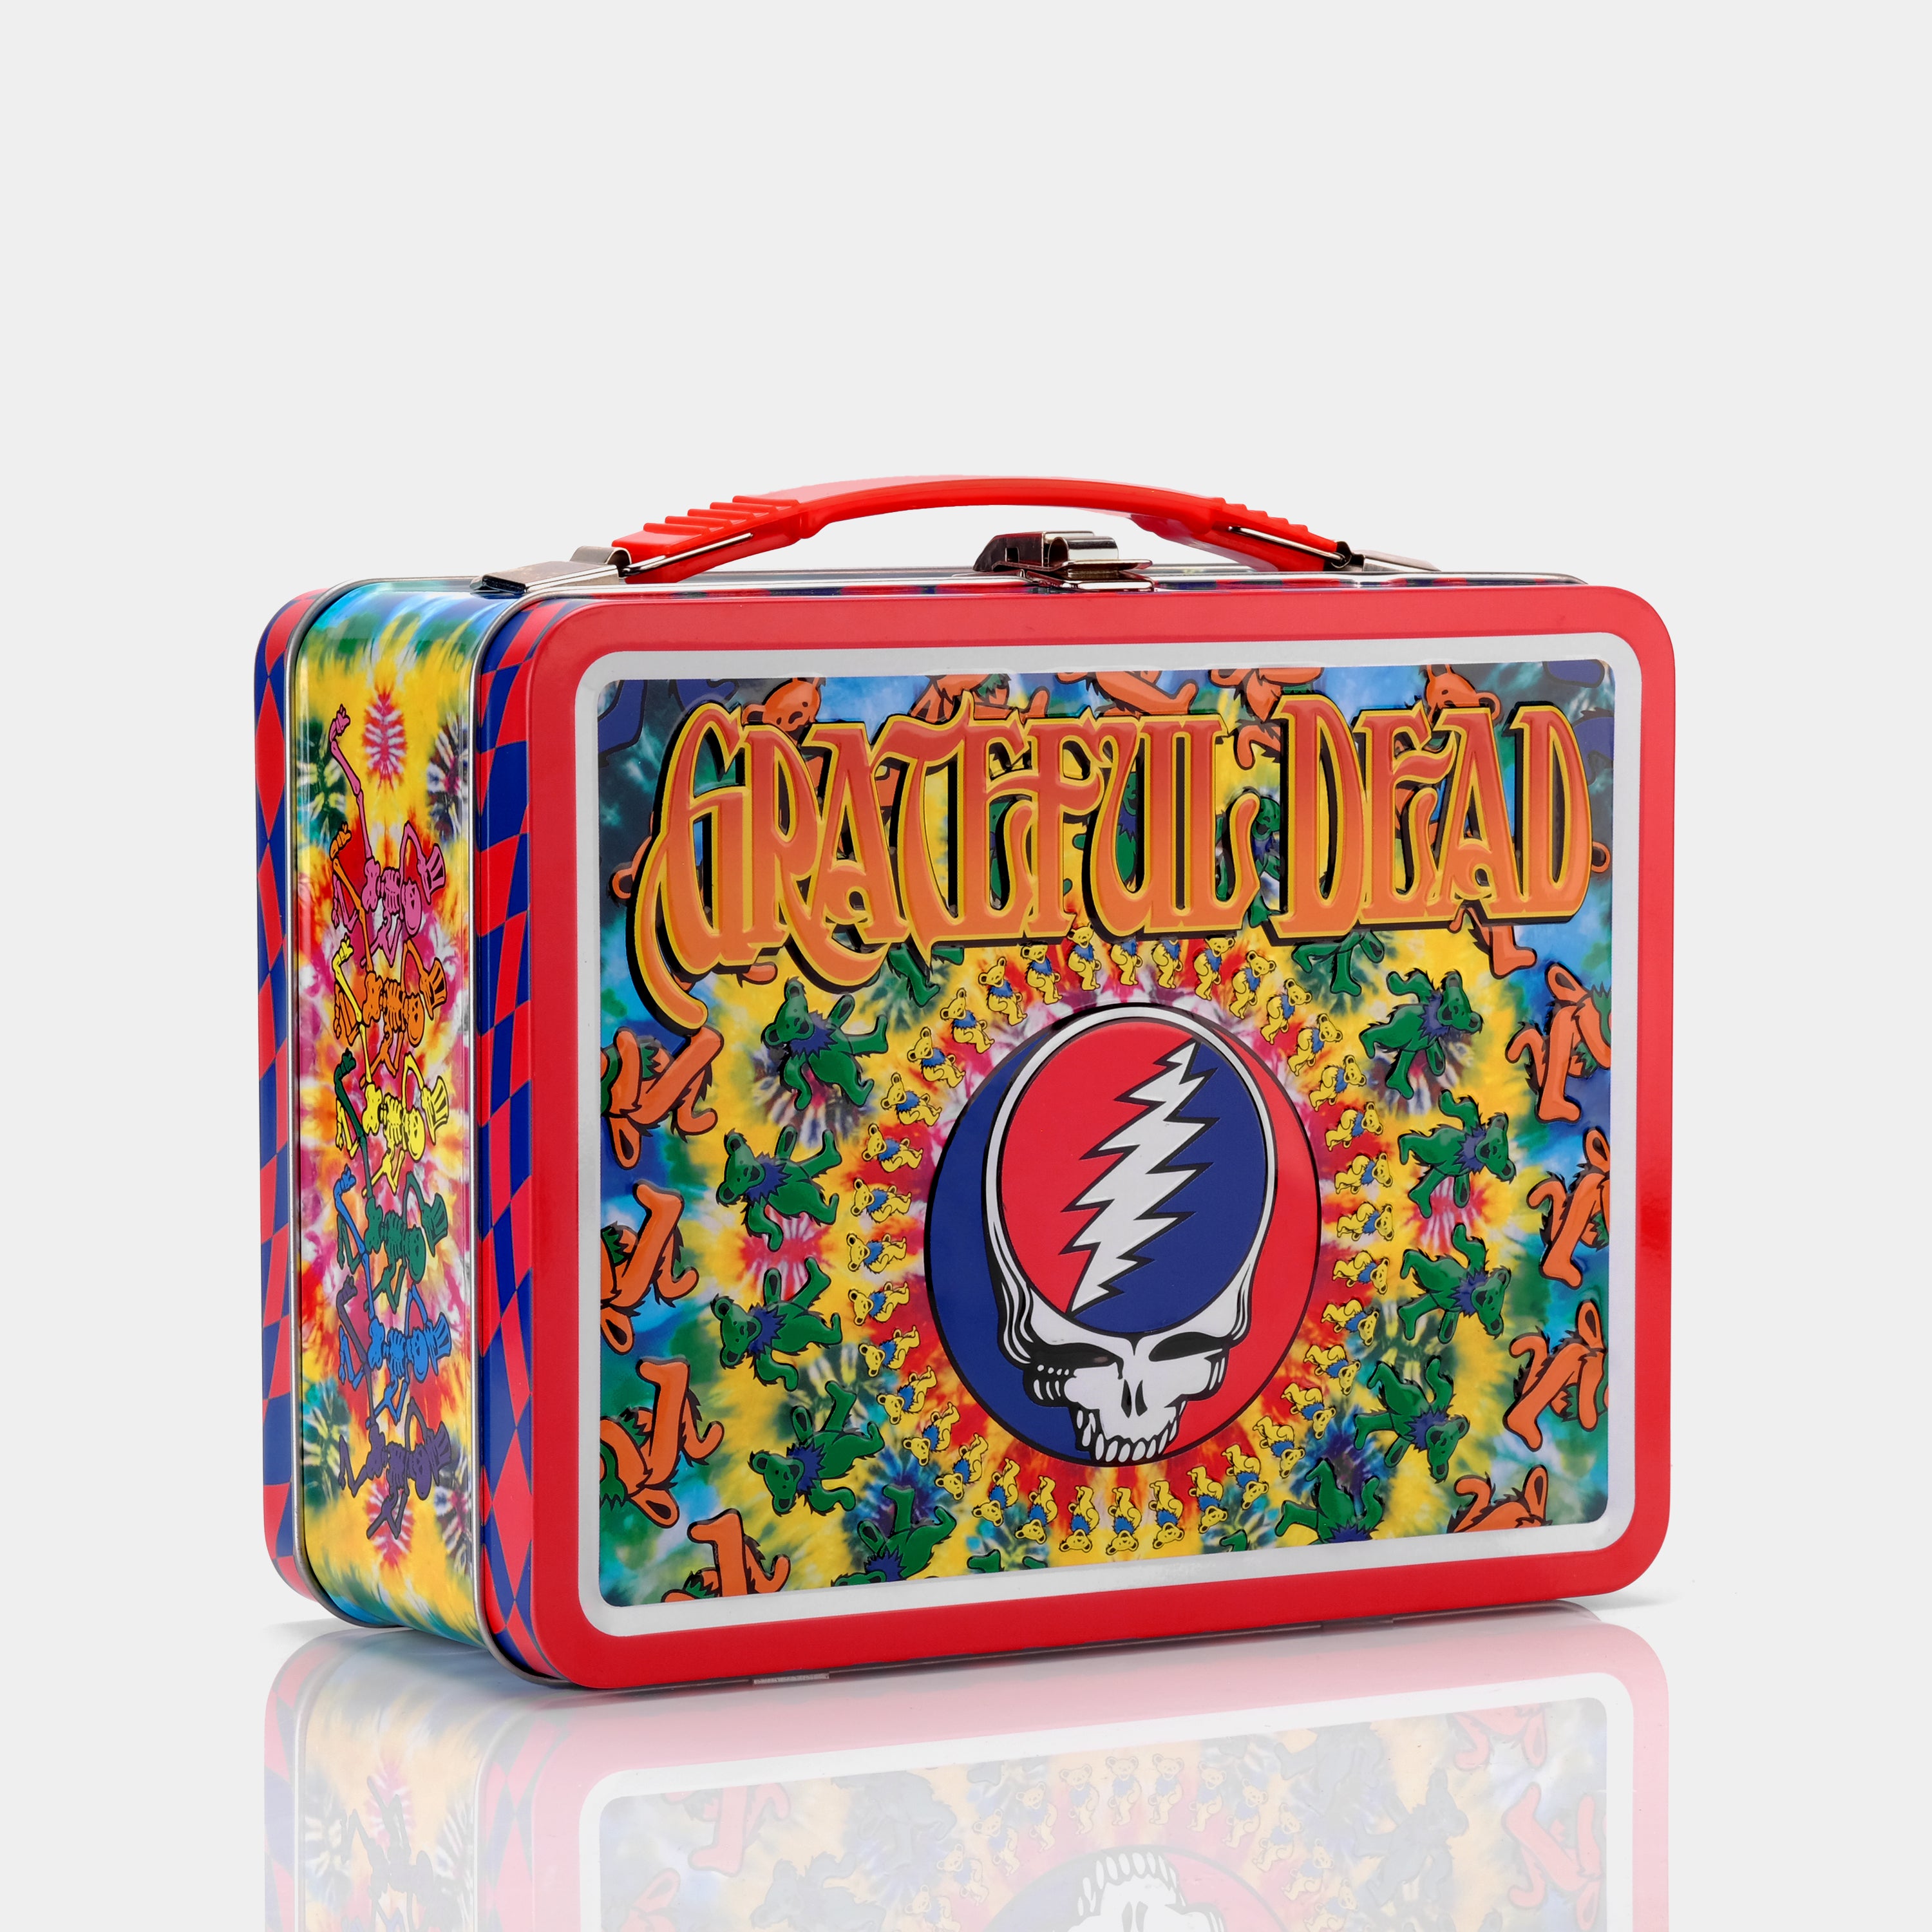 Grateful Dead Steal Your Face (Skull and Roses) Vintage-Inspired Tin Lunchbox